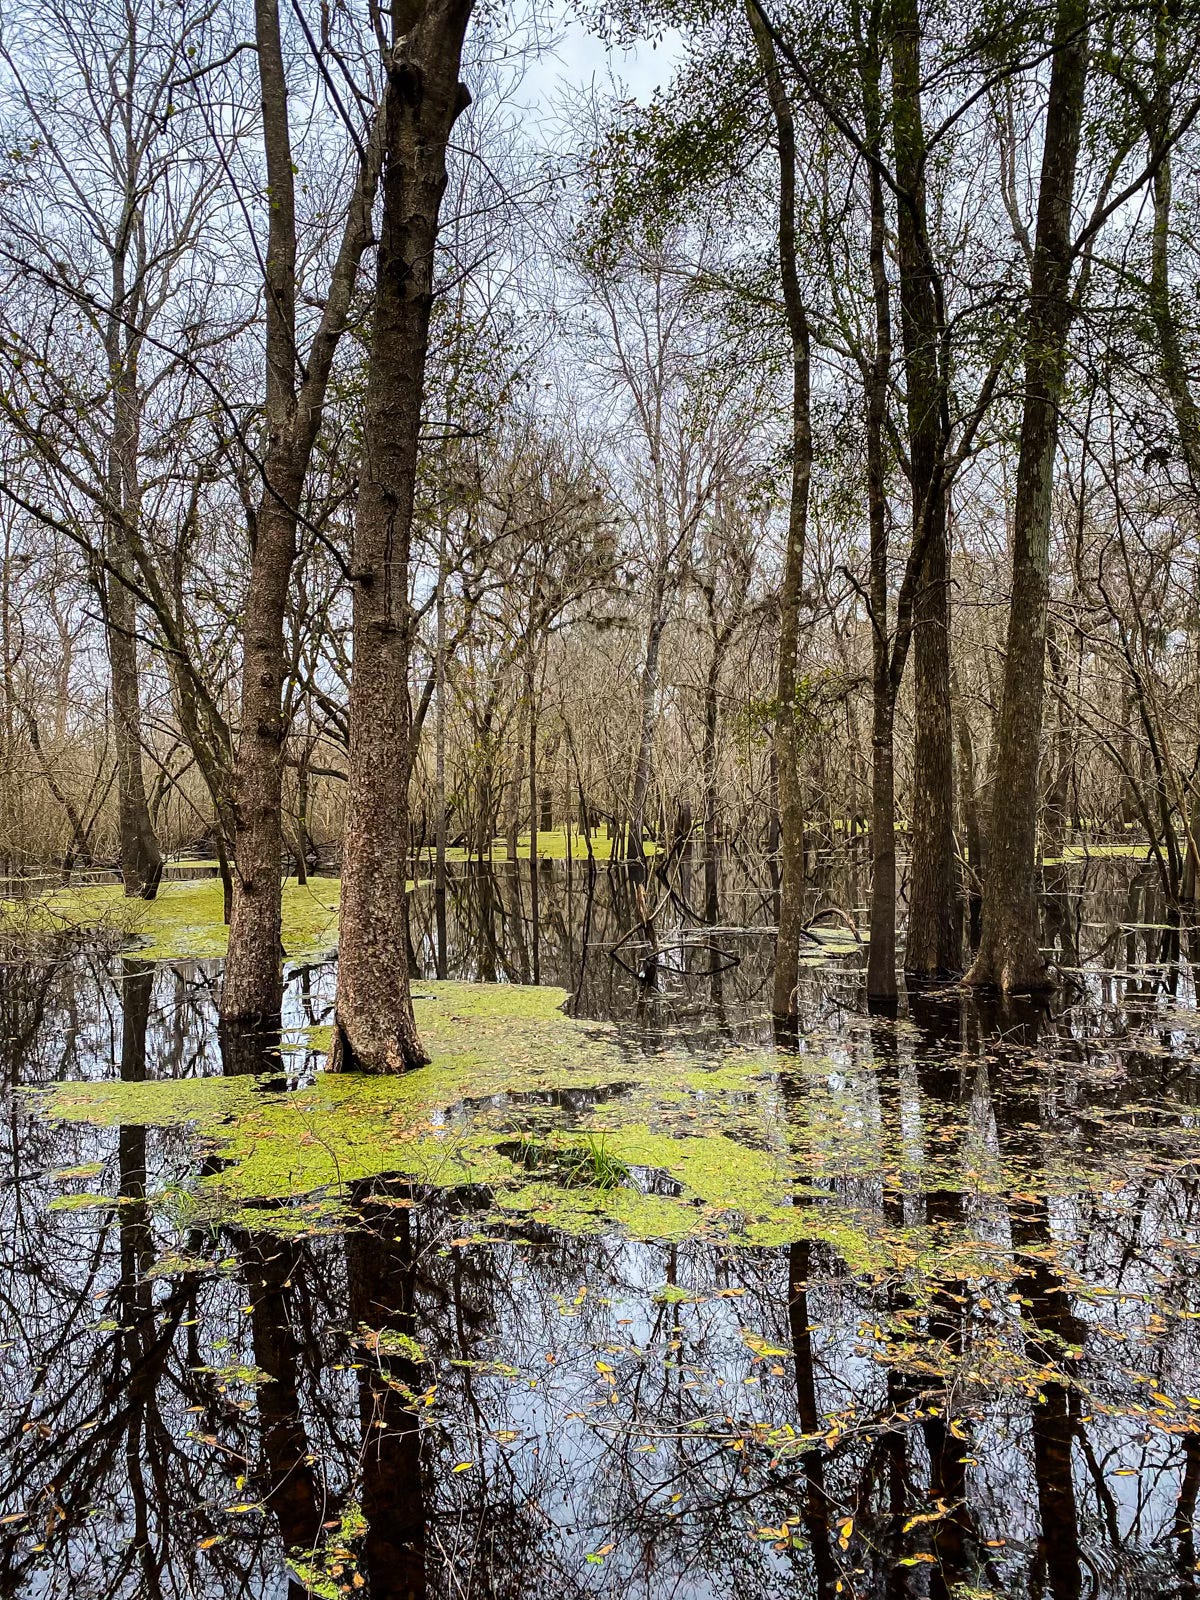 Cypress trees growing in swamp reflecting in green water